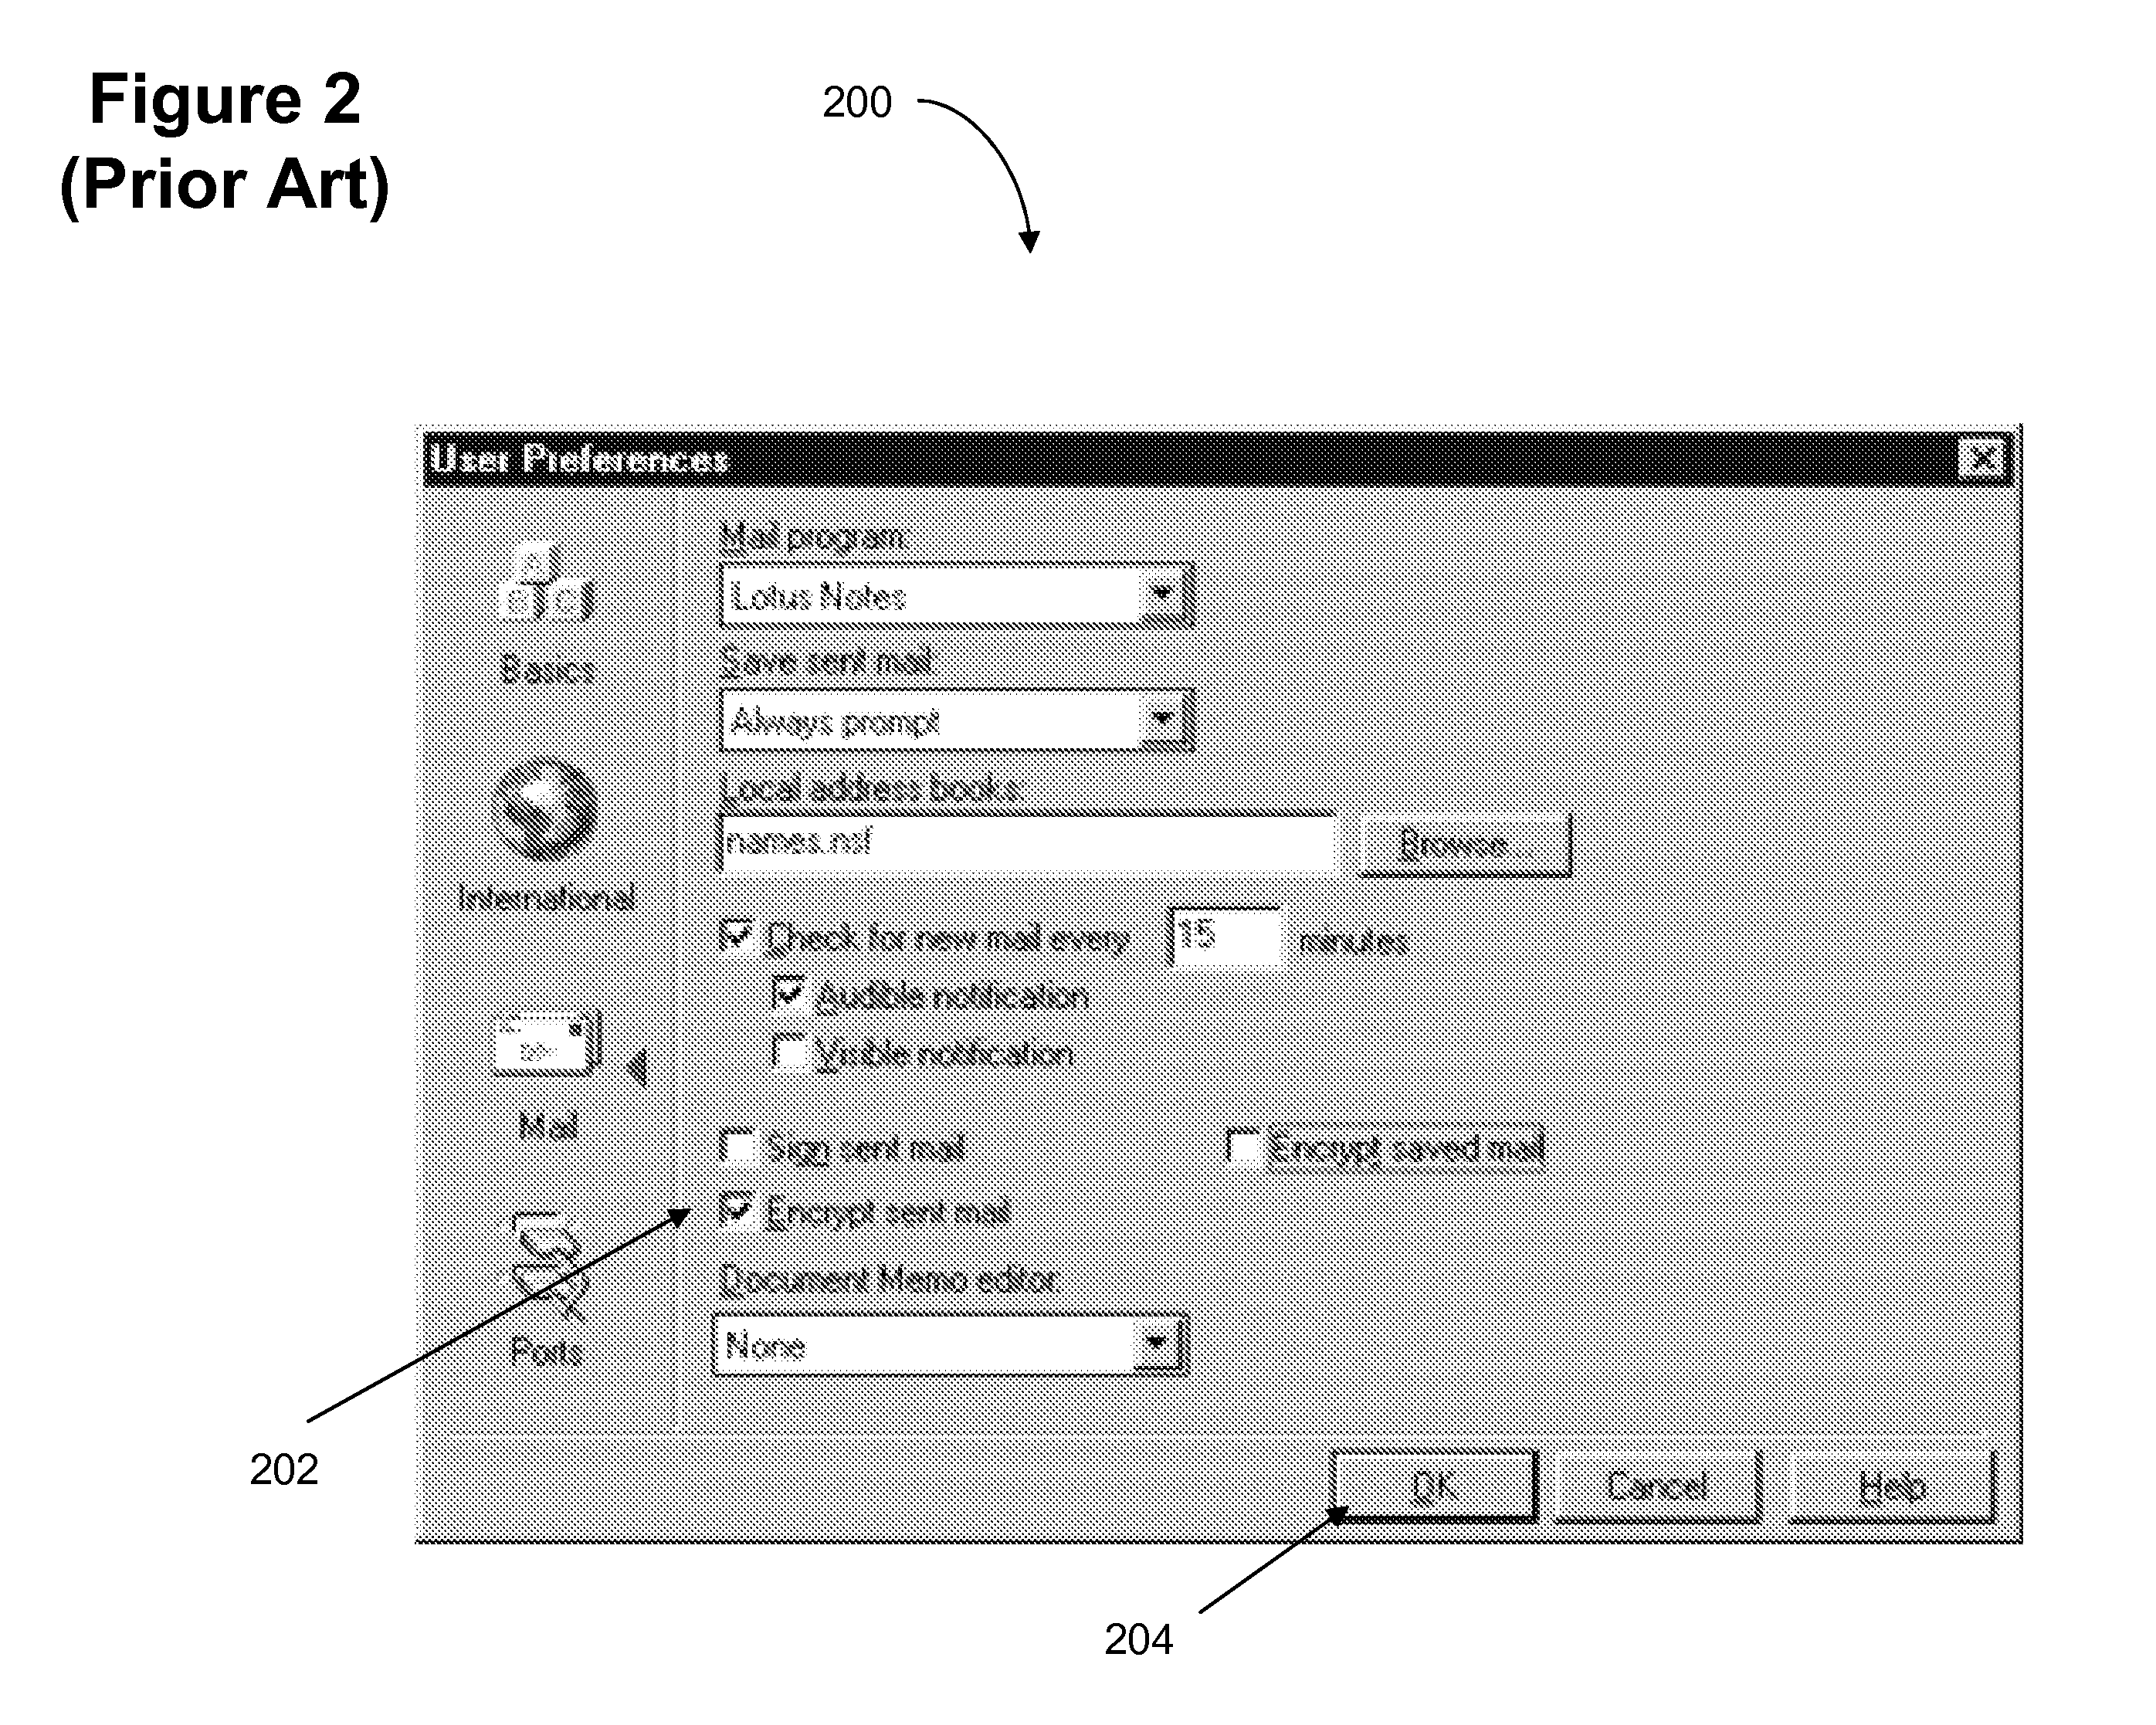 System and method for making encrypted content available to derivable related parties